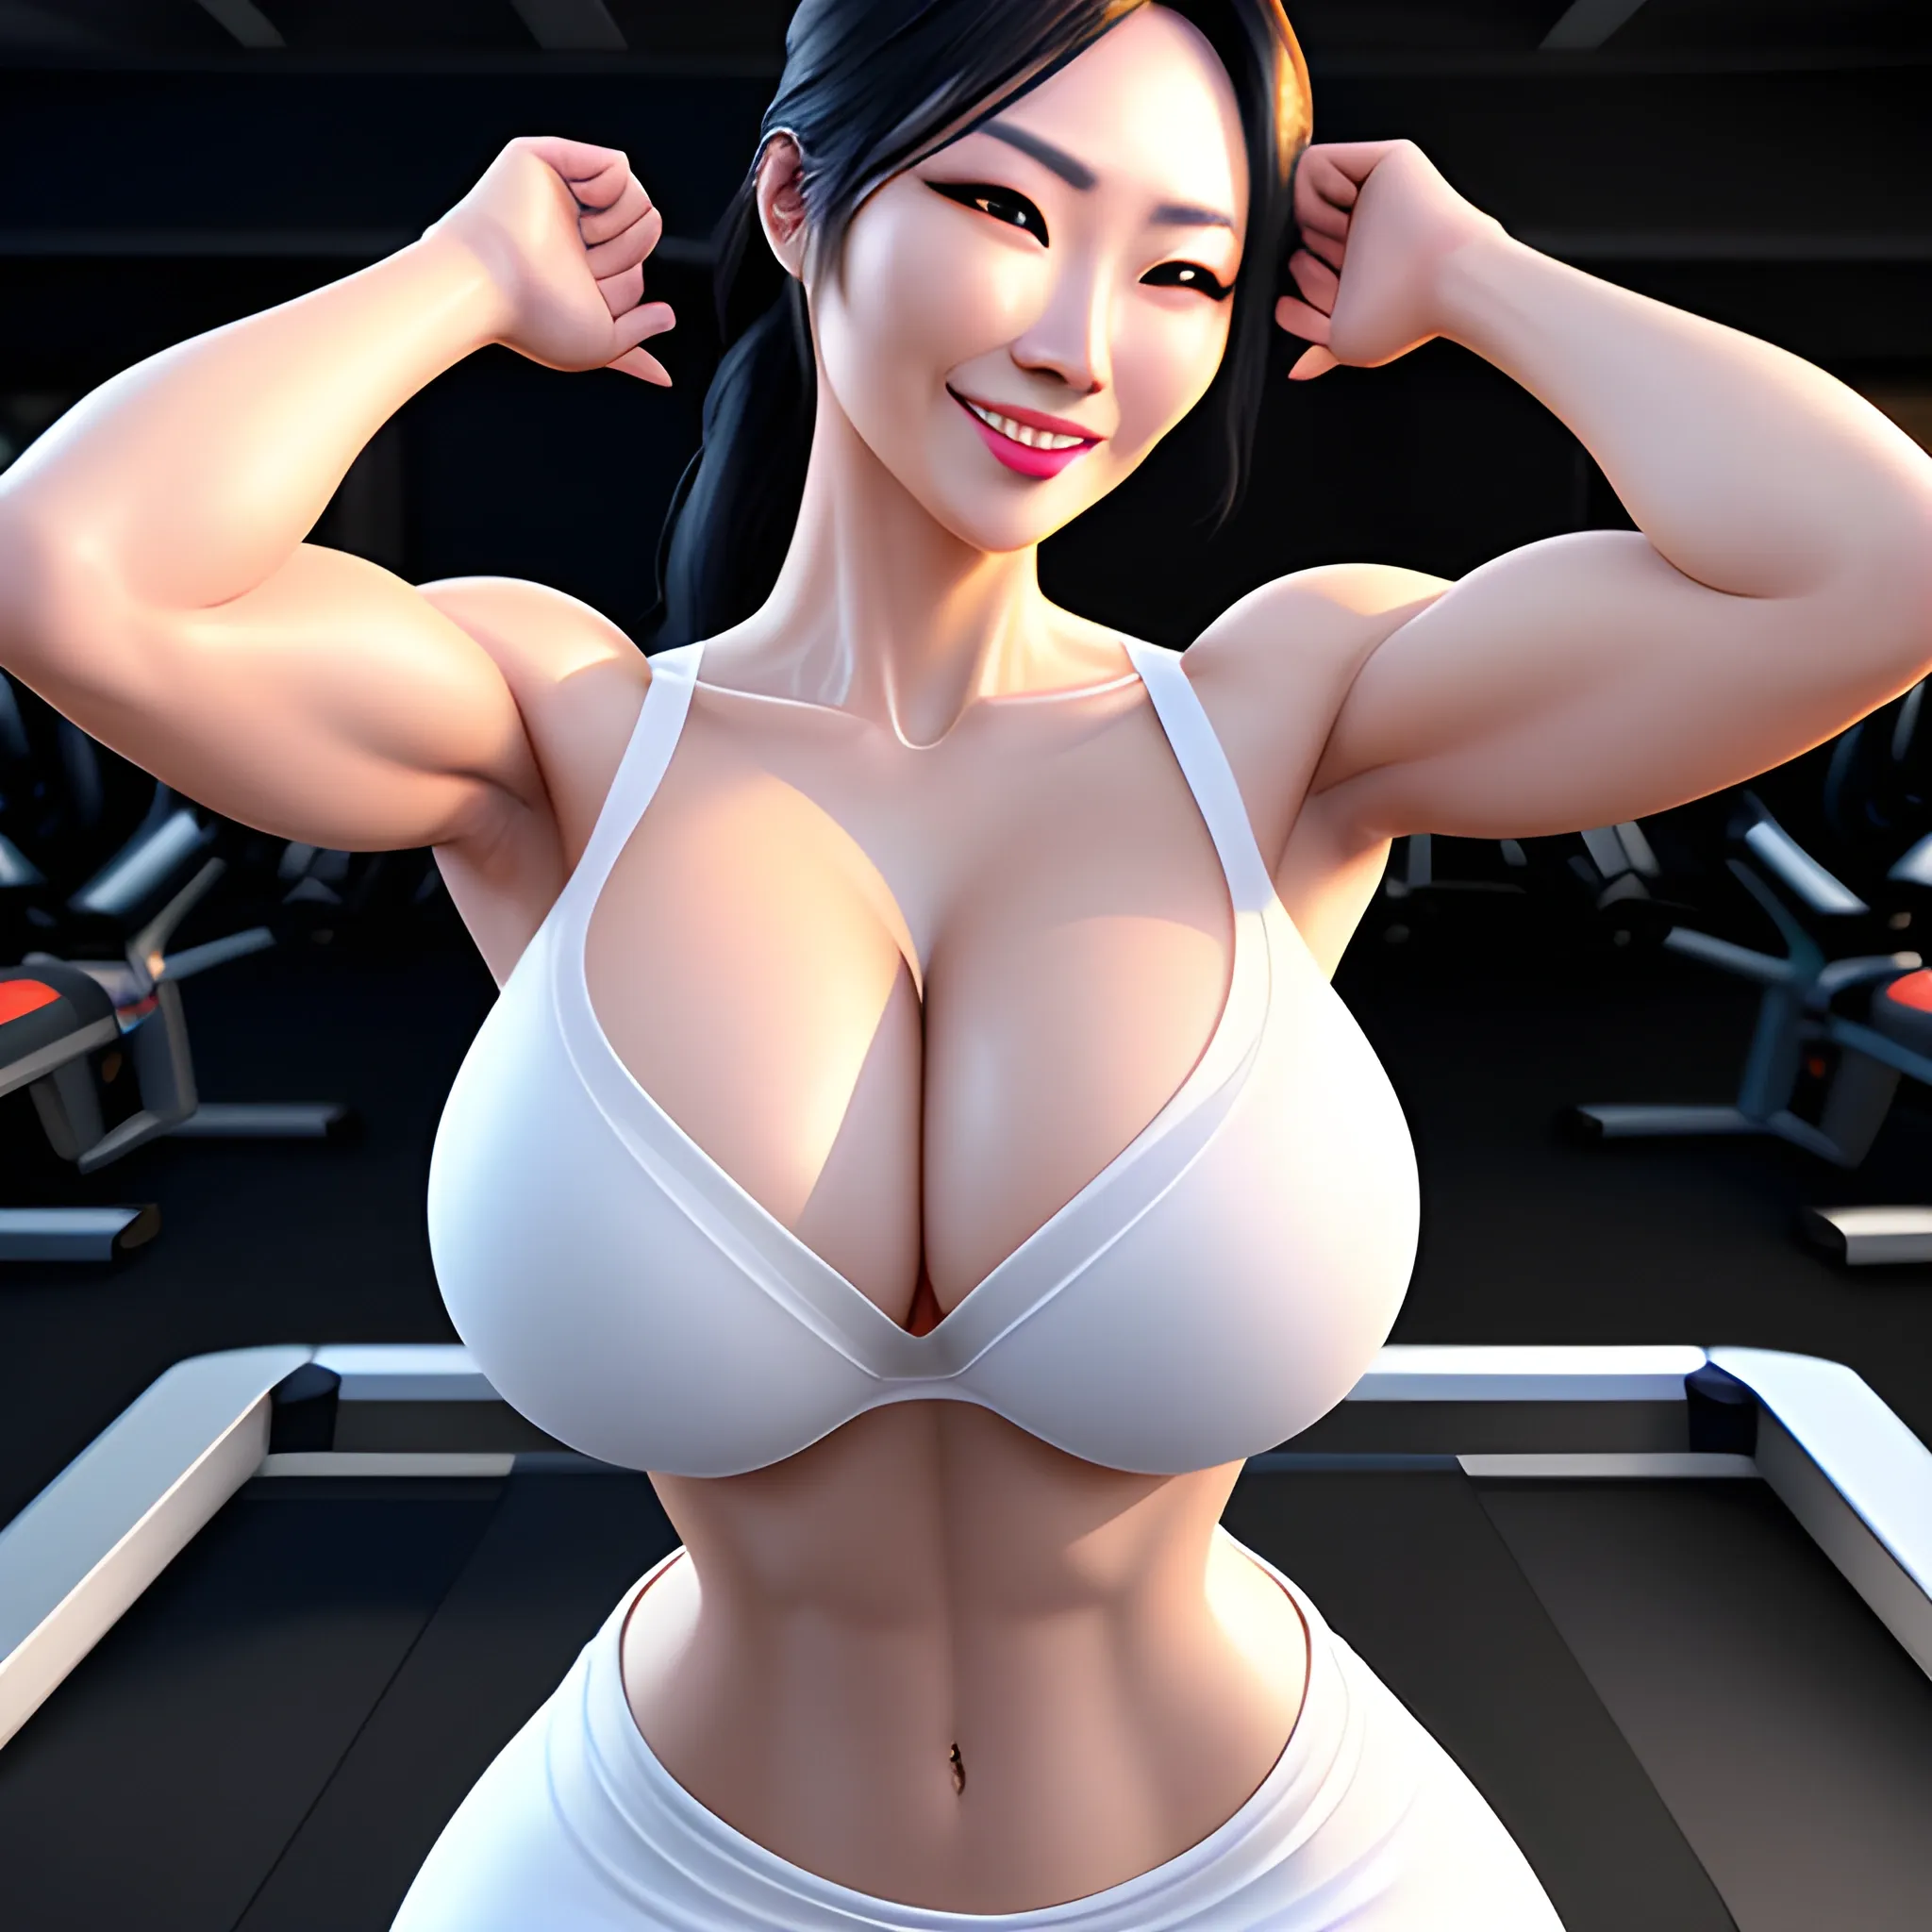 RAW photo, photo of A korean beauty girl with big breasts and ha